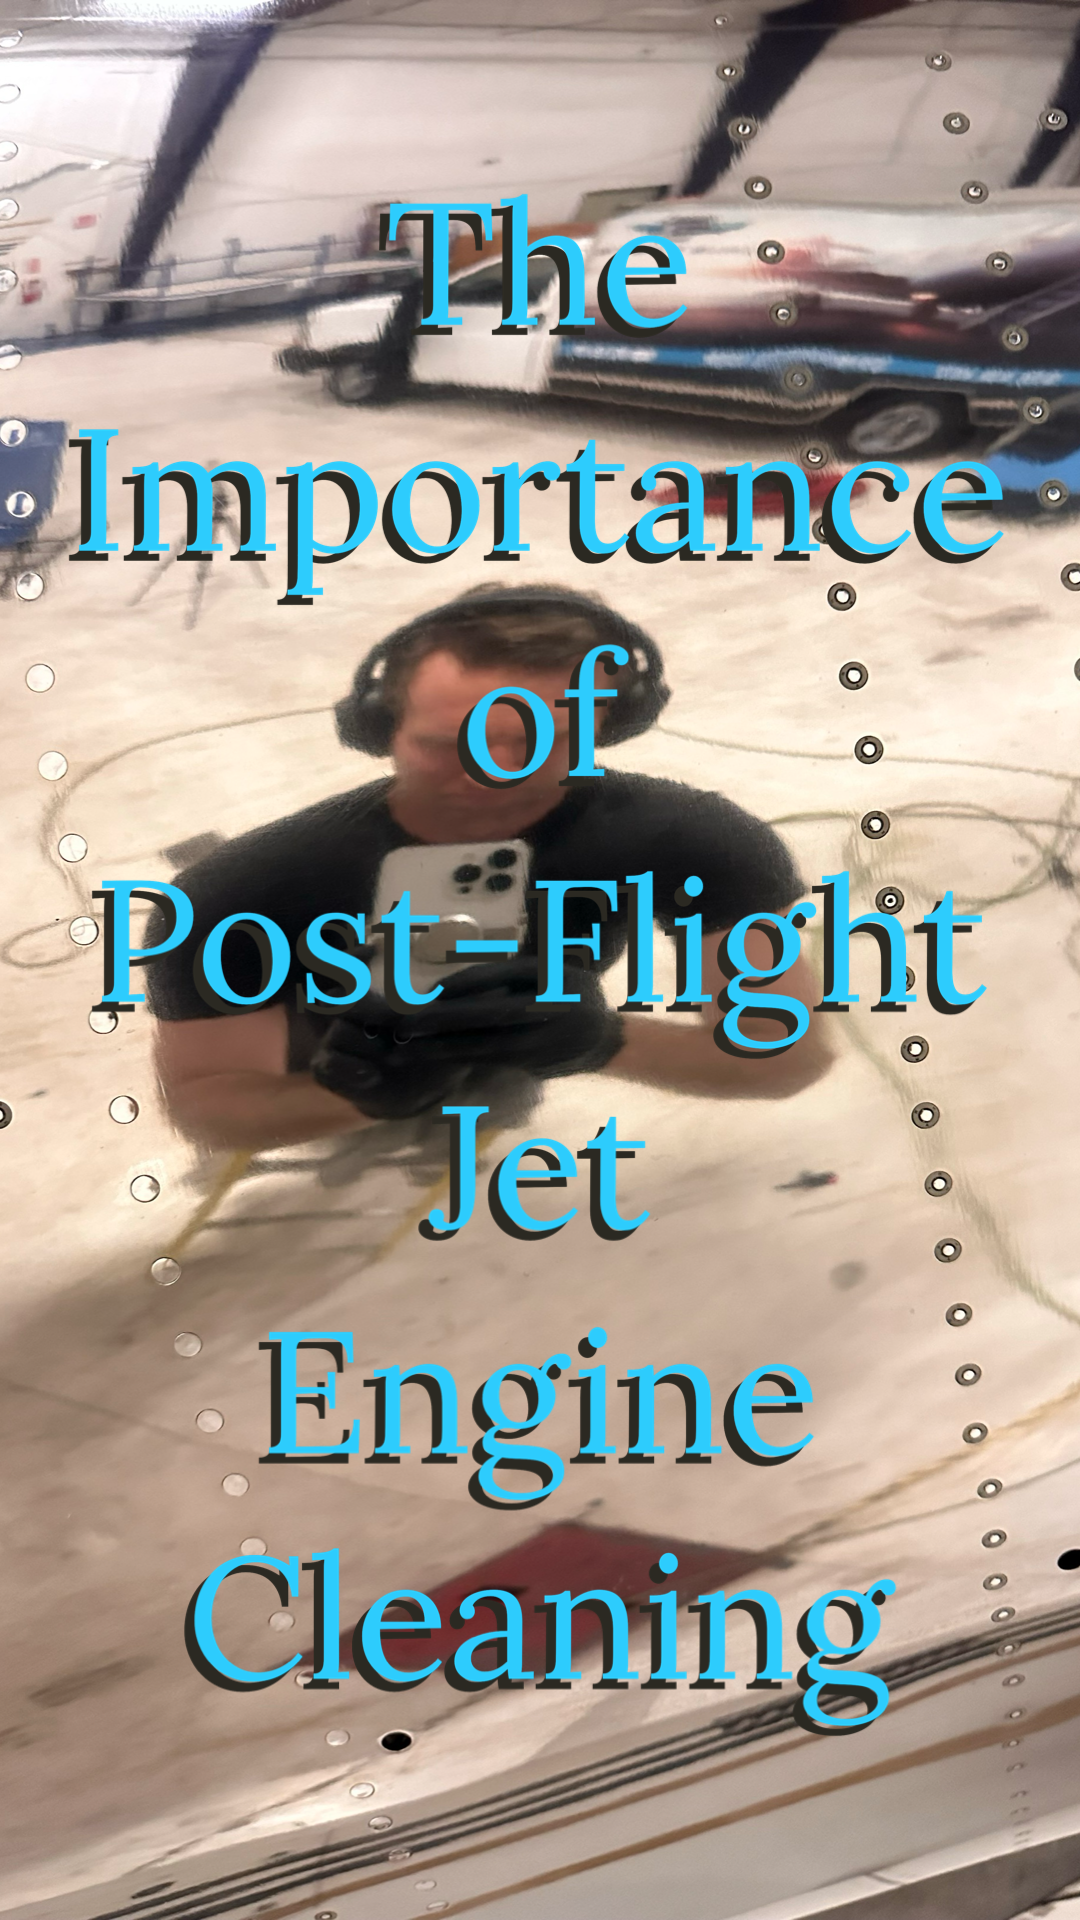 Elevating Your Aircraft's Shine: The Importance of Post-Flight Jet Engine Cleaning